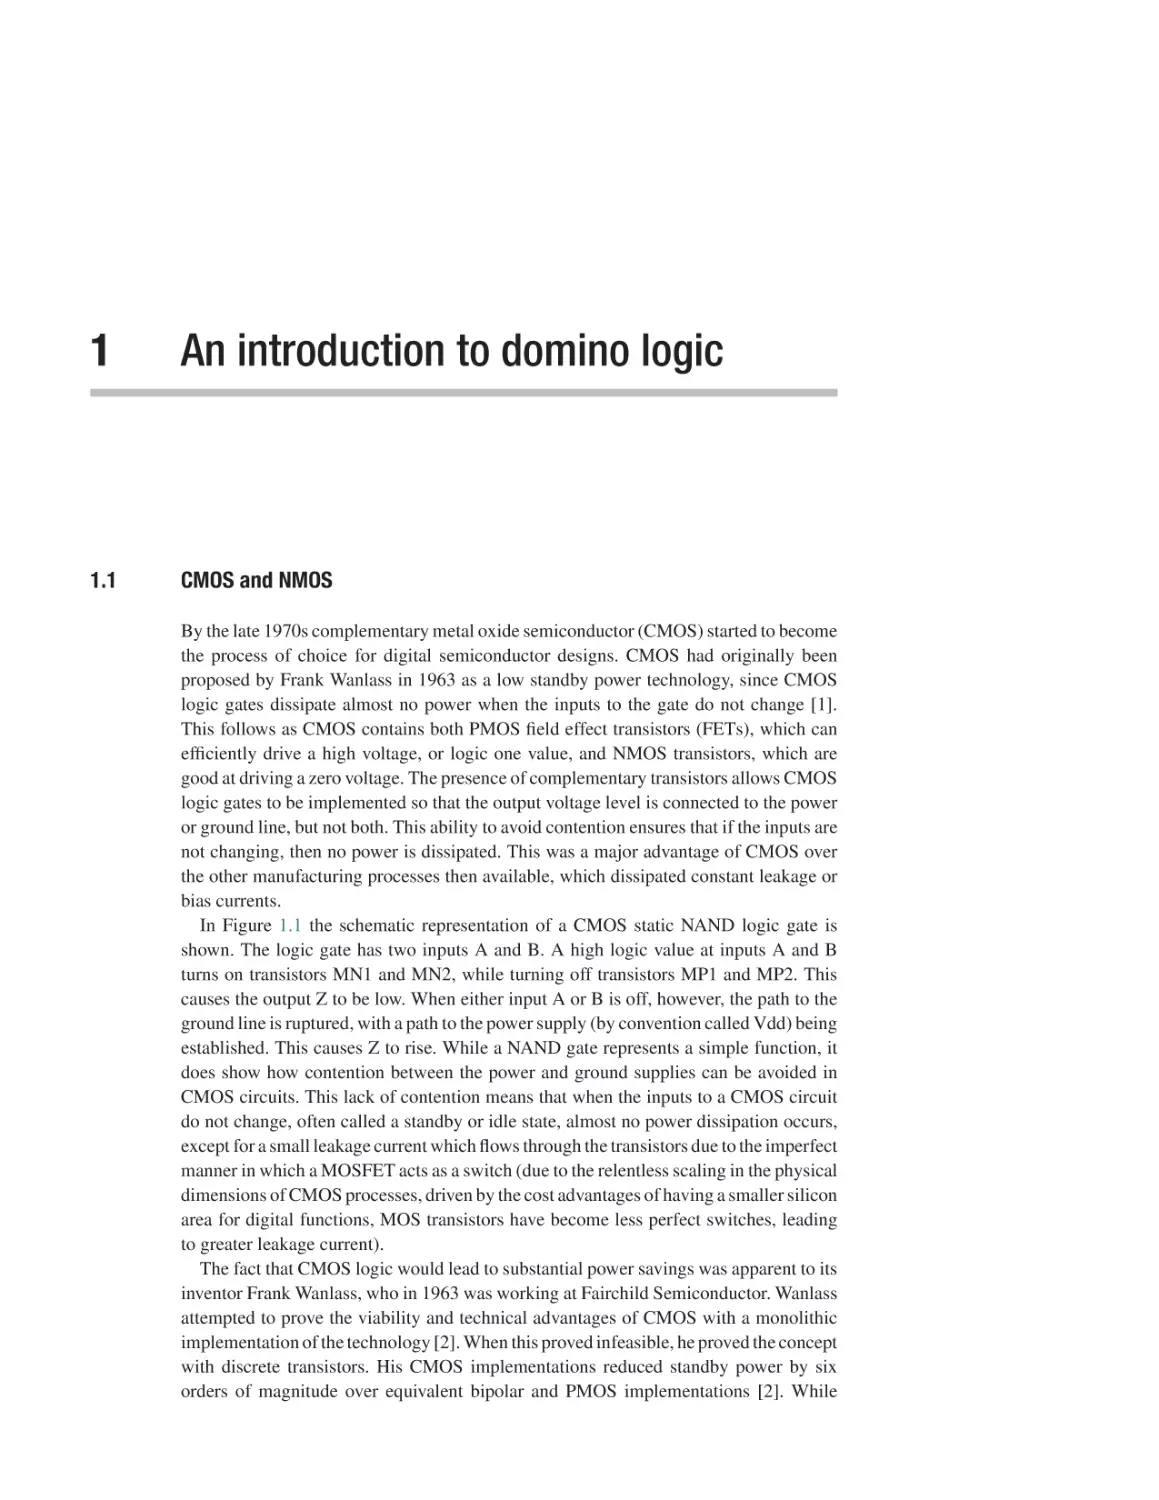 1 An introduction to domino logic
1.1 CMOS and NMOS